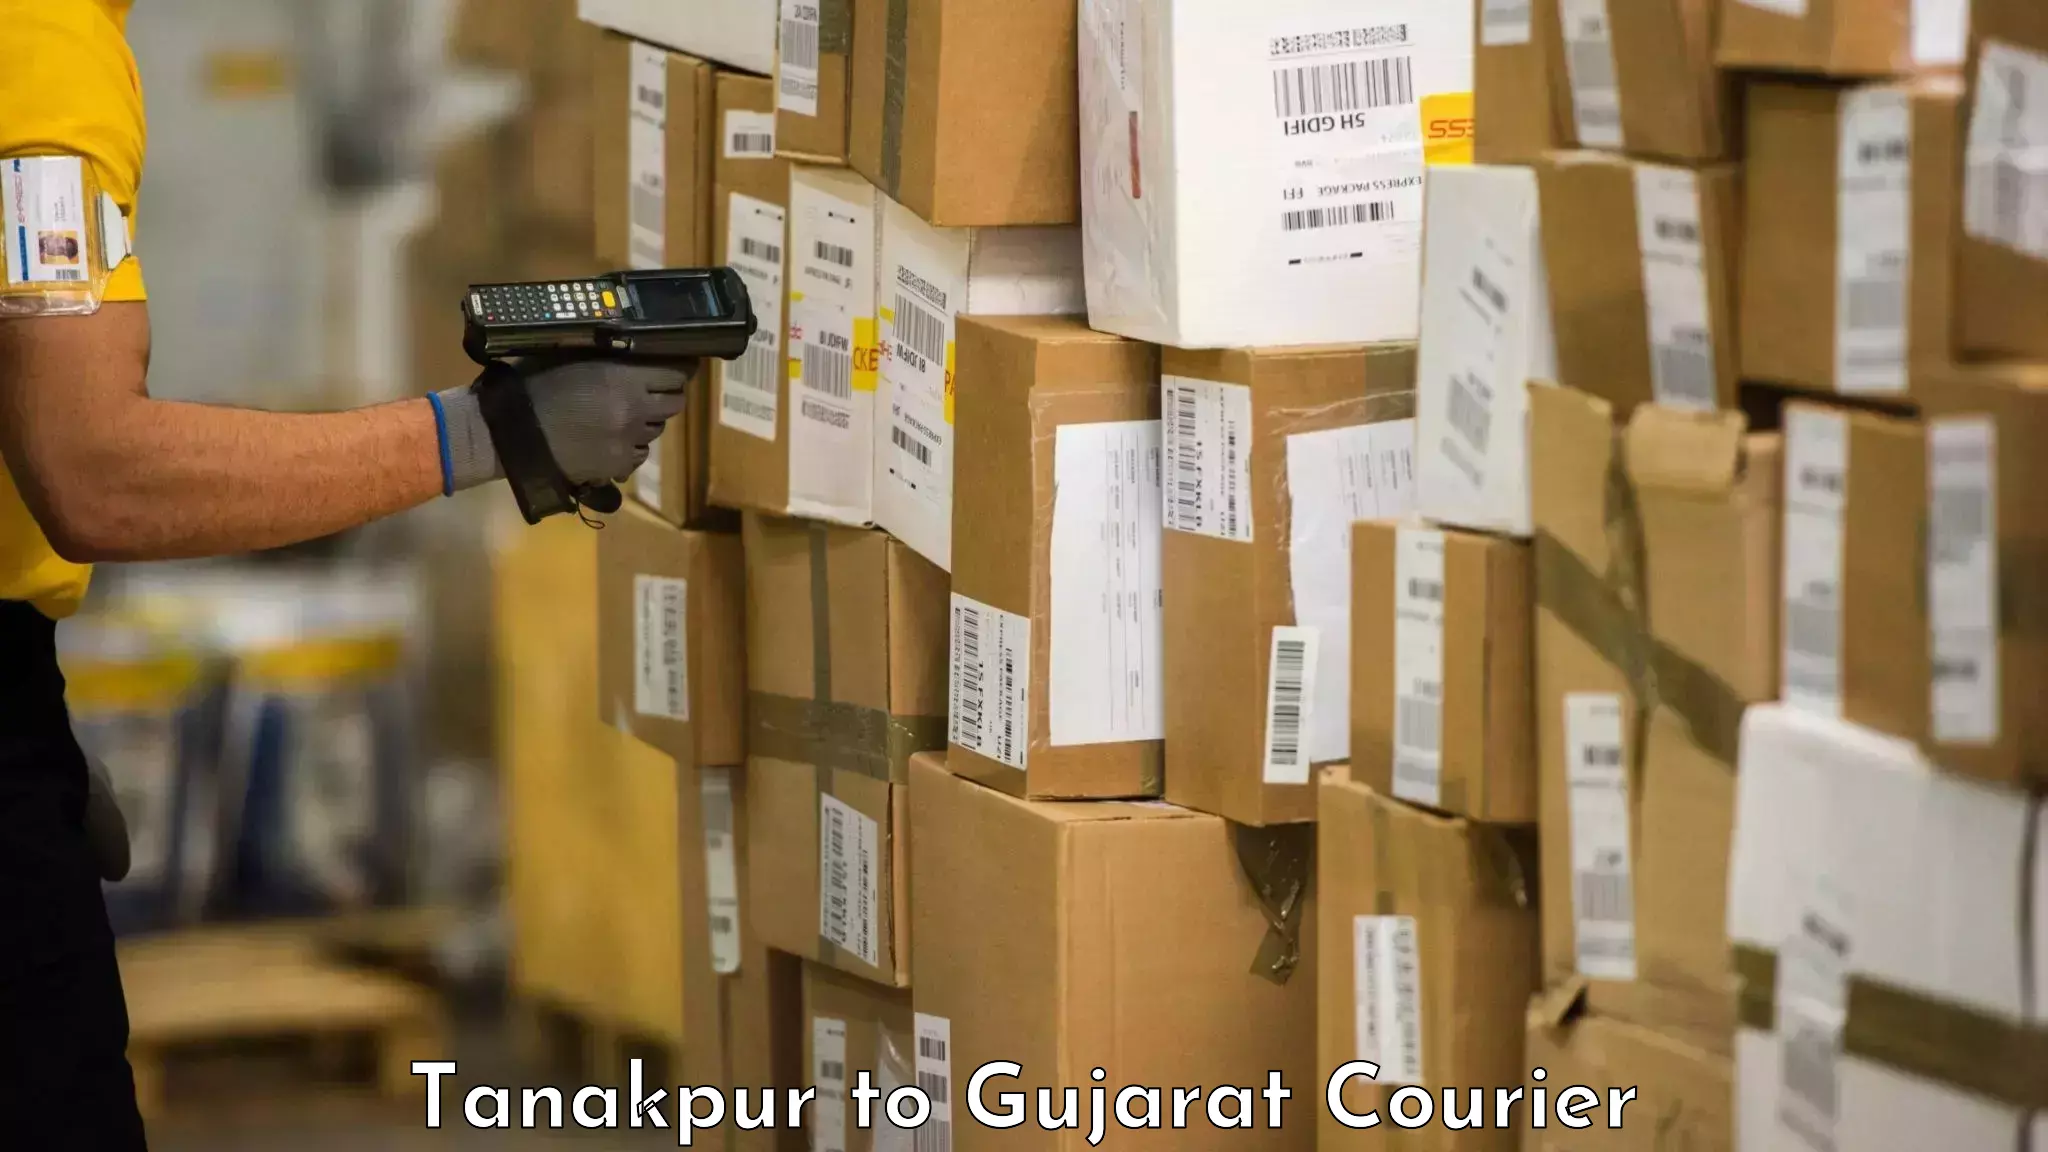 Luggage transport consulting Tanakpur to Gujarat